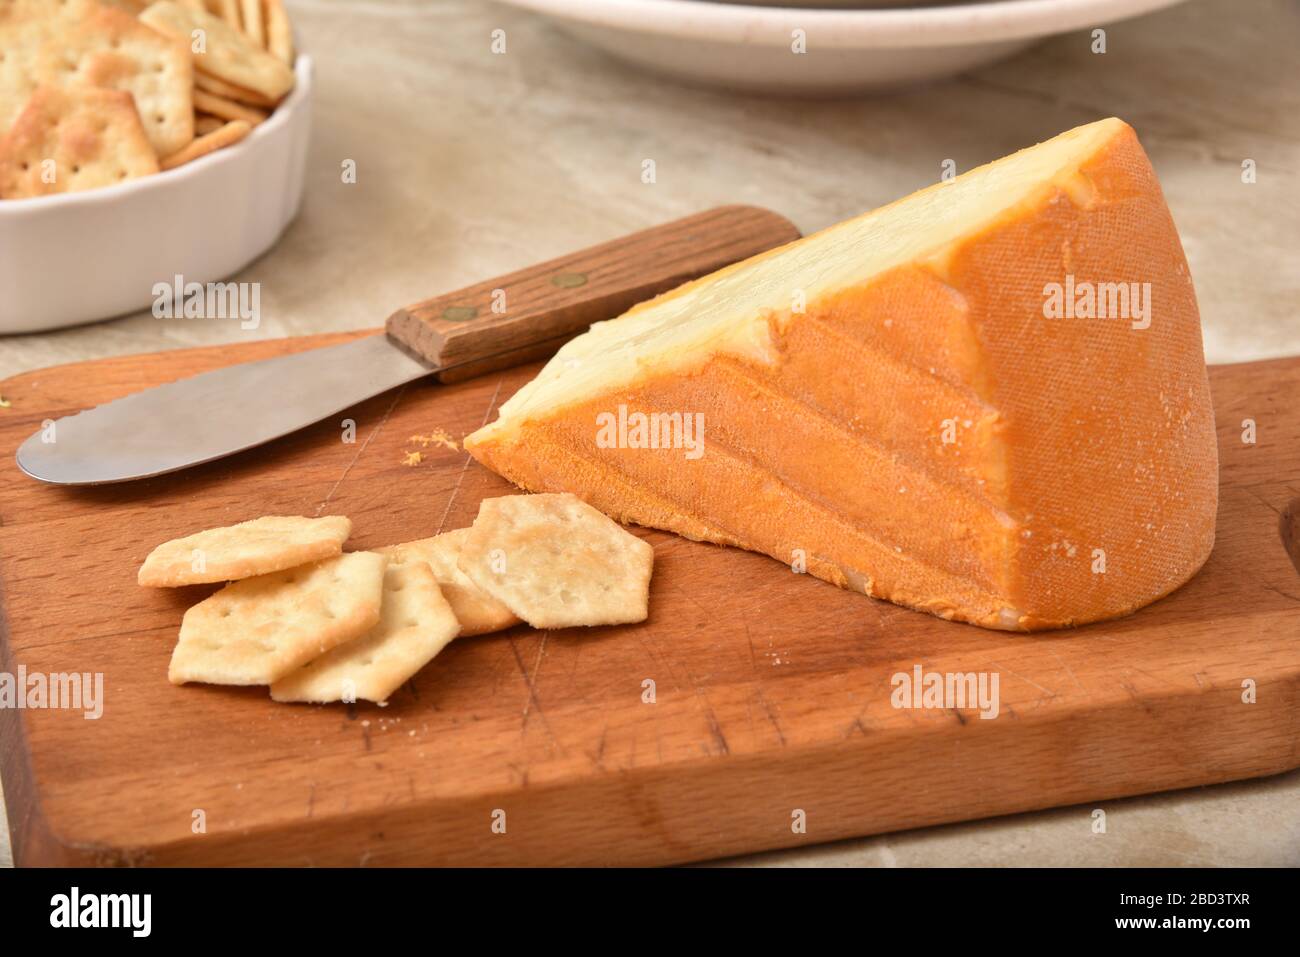 A wedge of gourmet imported Belgium Autumn Cheese with crackers. Stock Photo